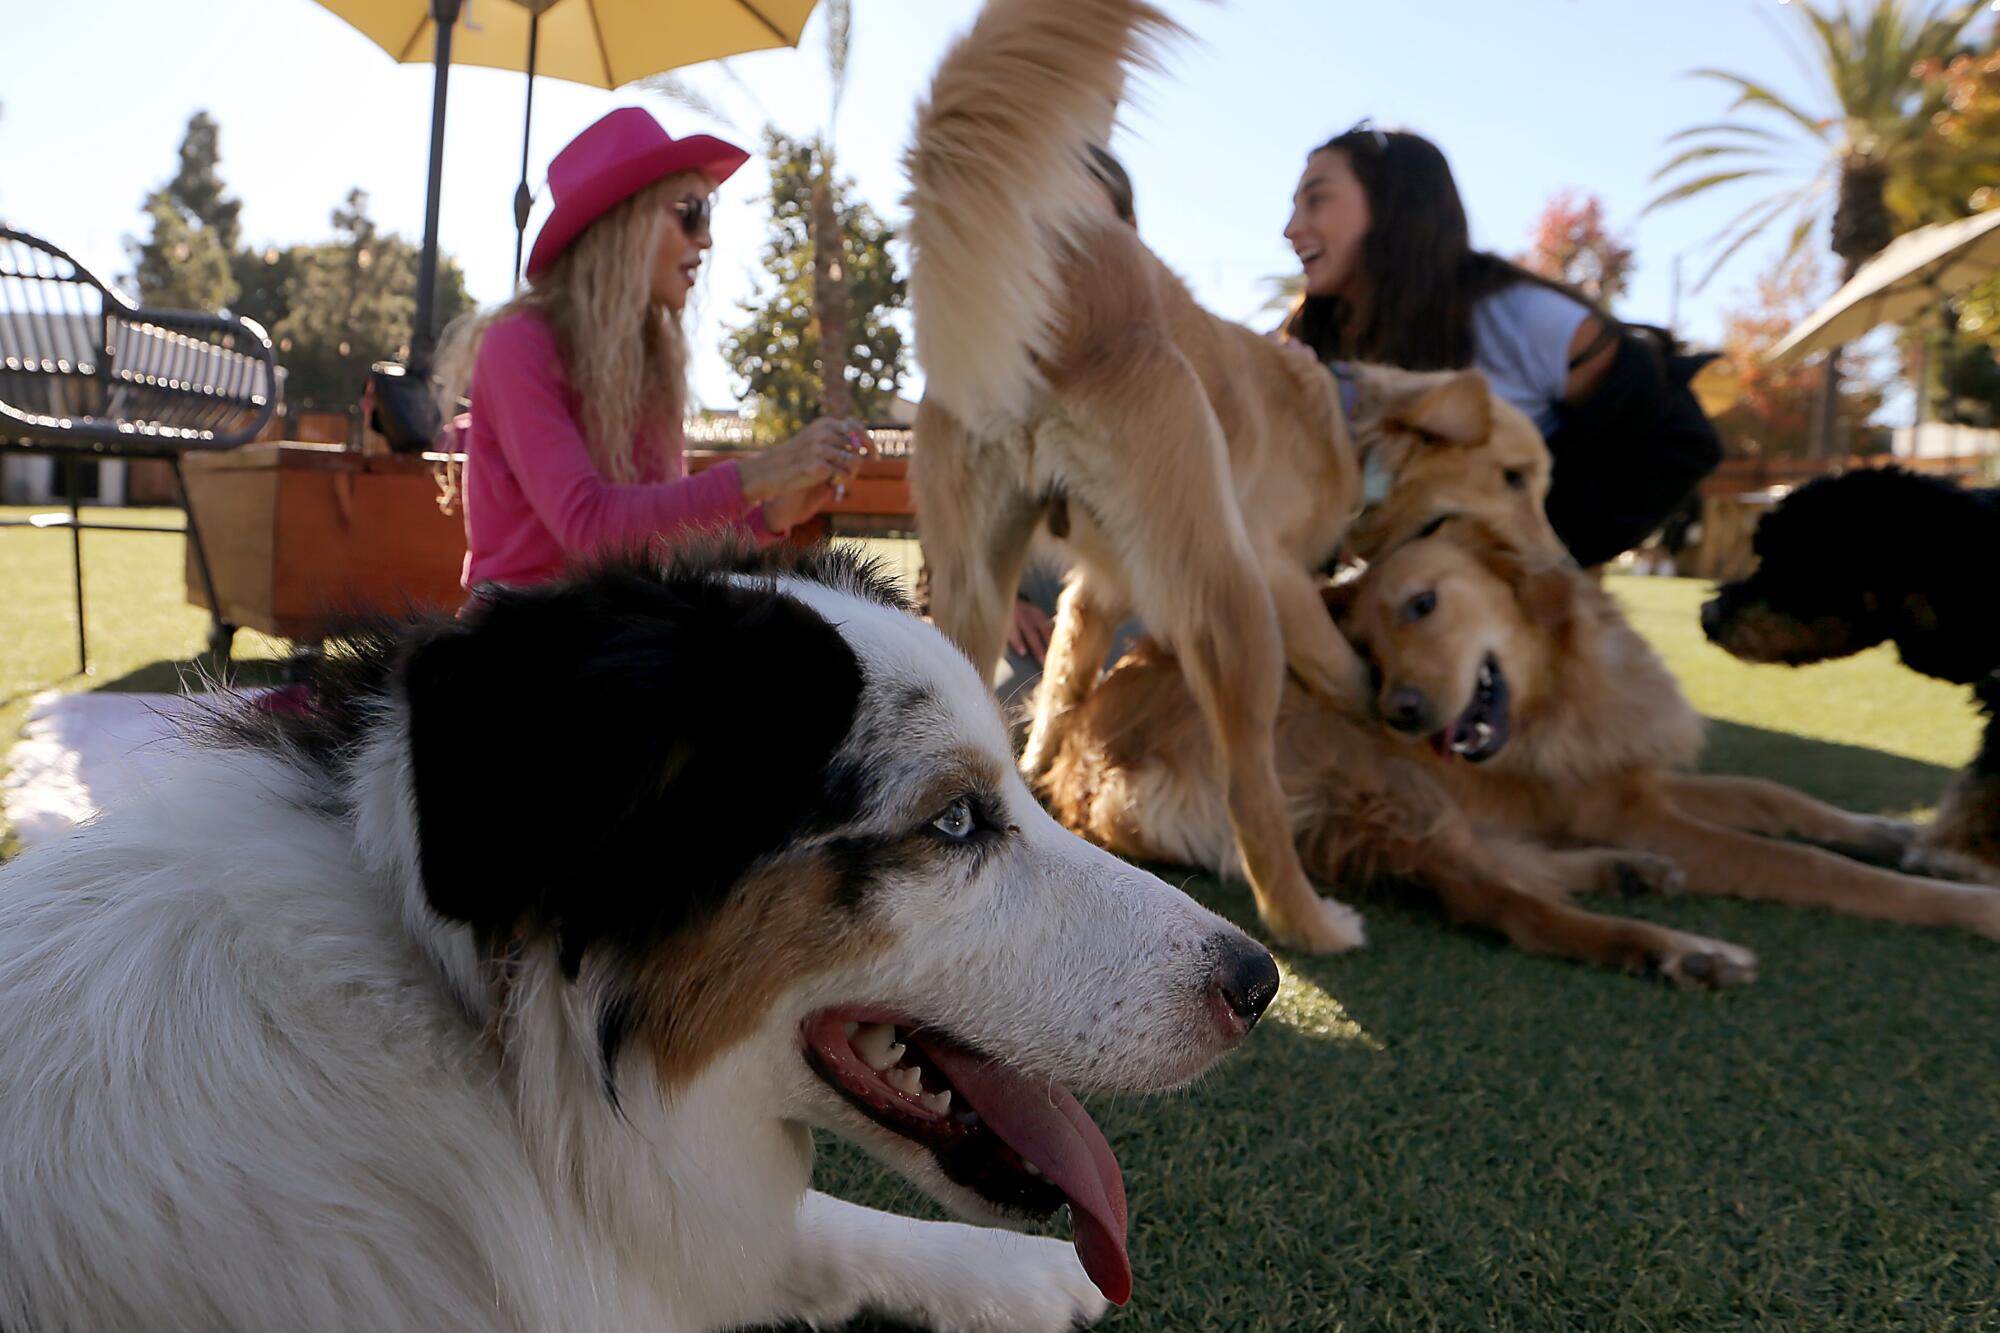 How We Rate Dogs raised over $1 million for dogs in need